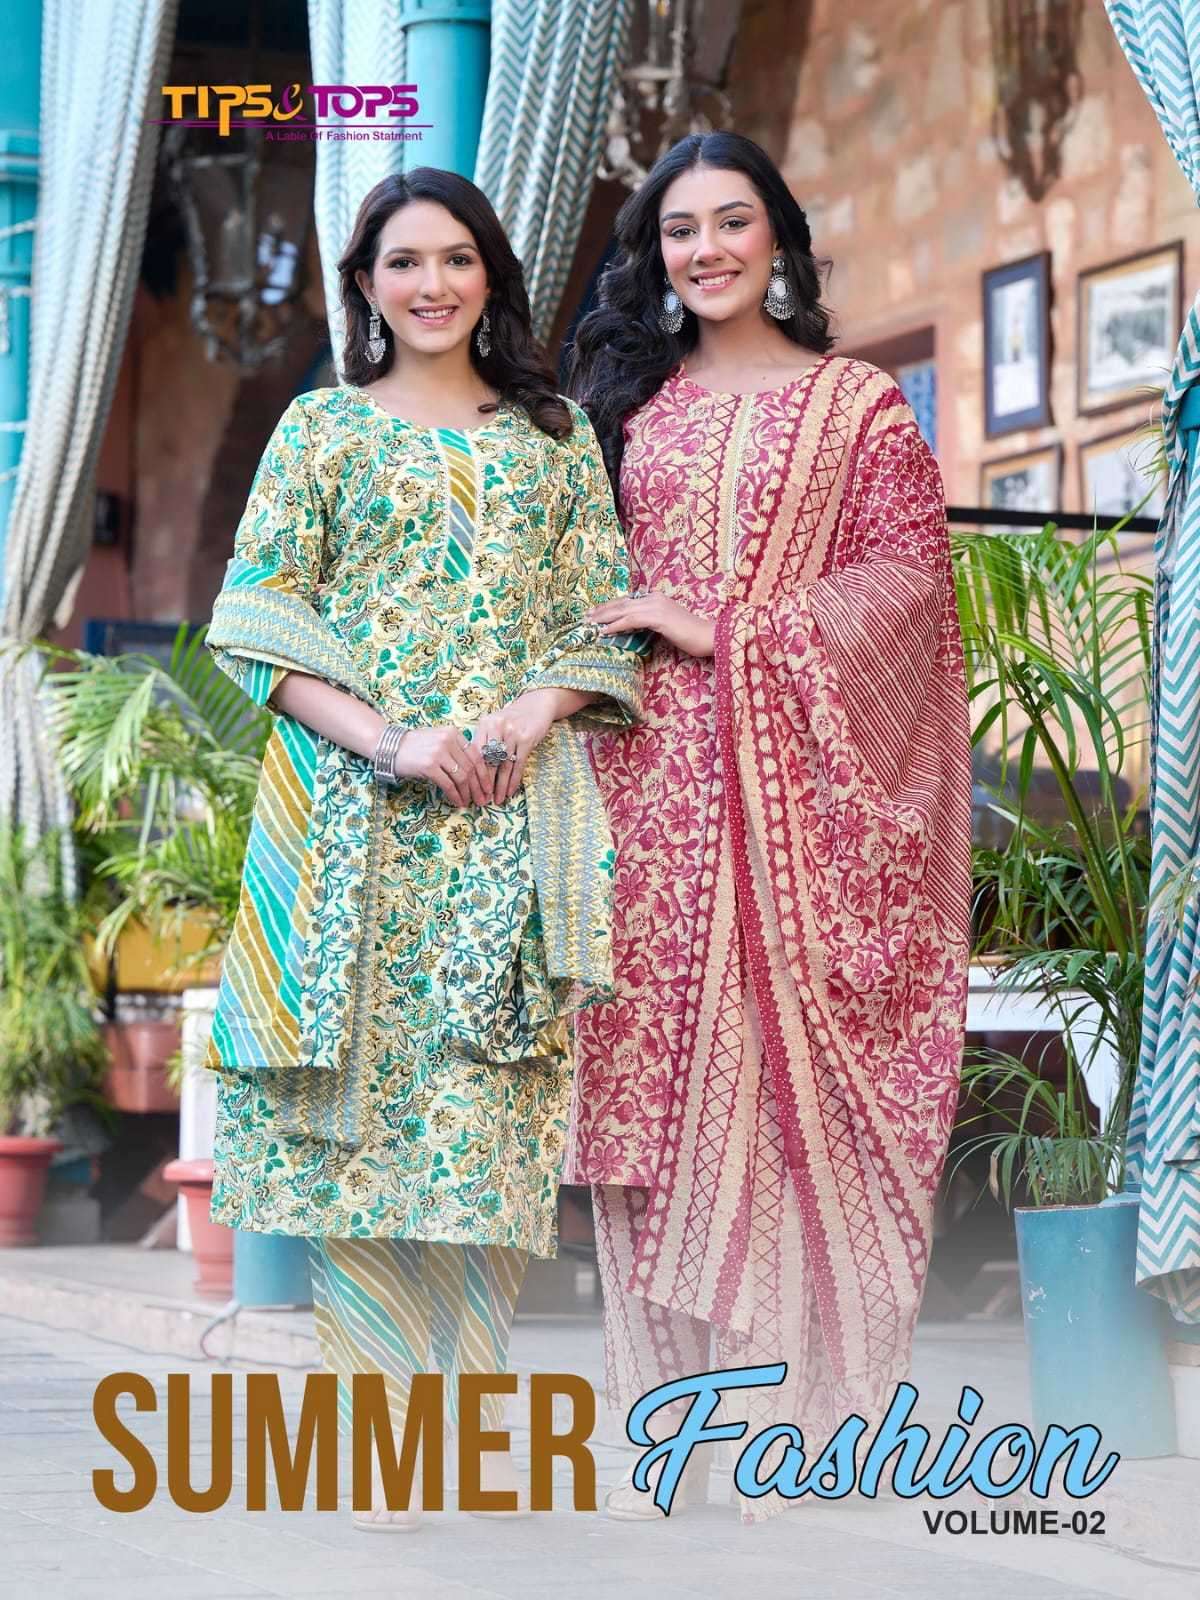 tip and tops summer fashion vol 2 series 201-206 Cotton Print readymade suit 